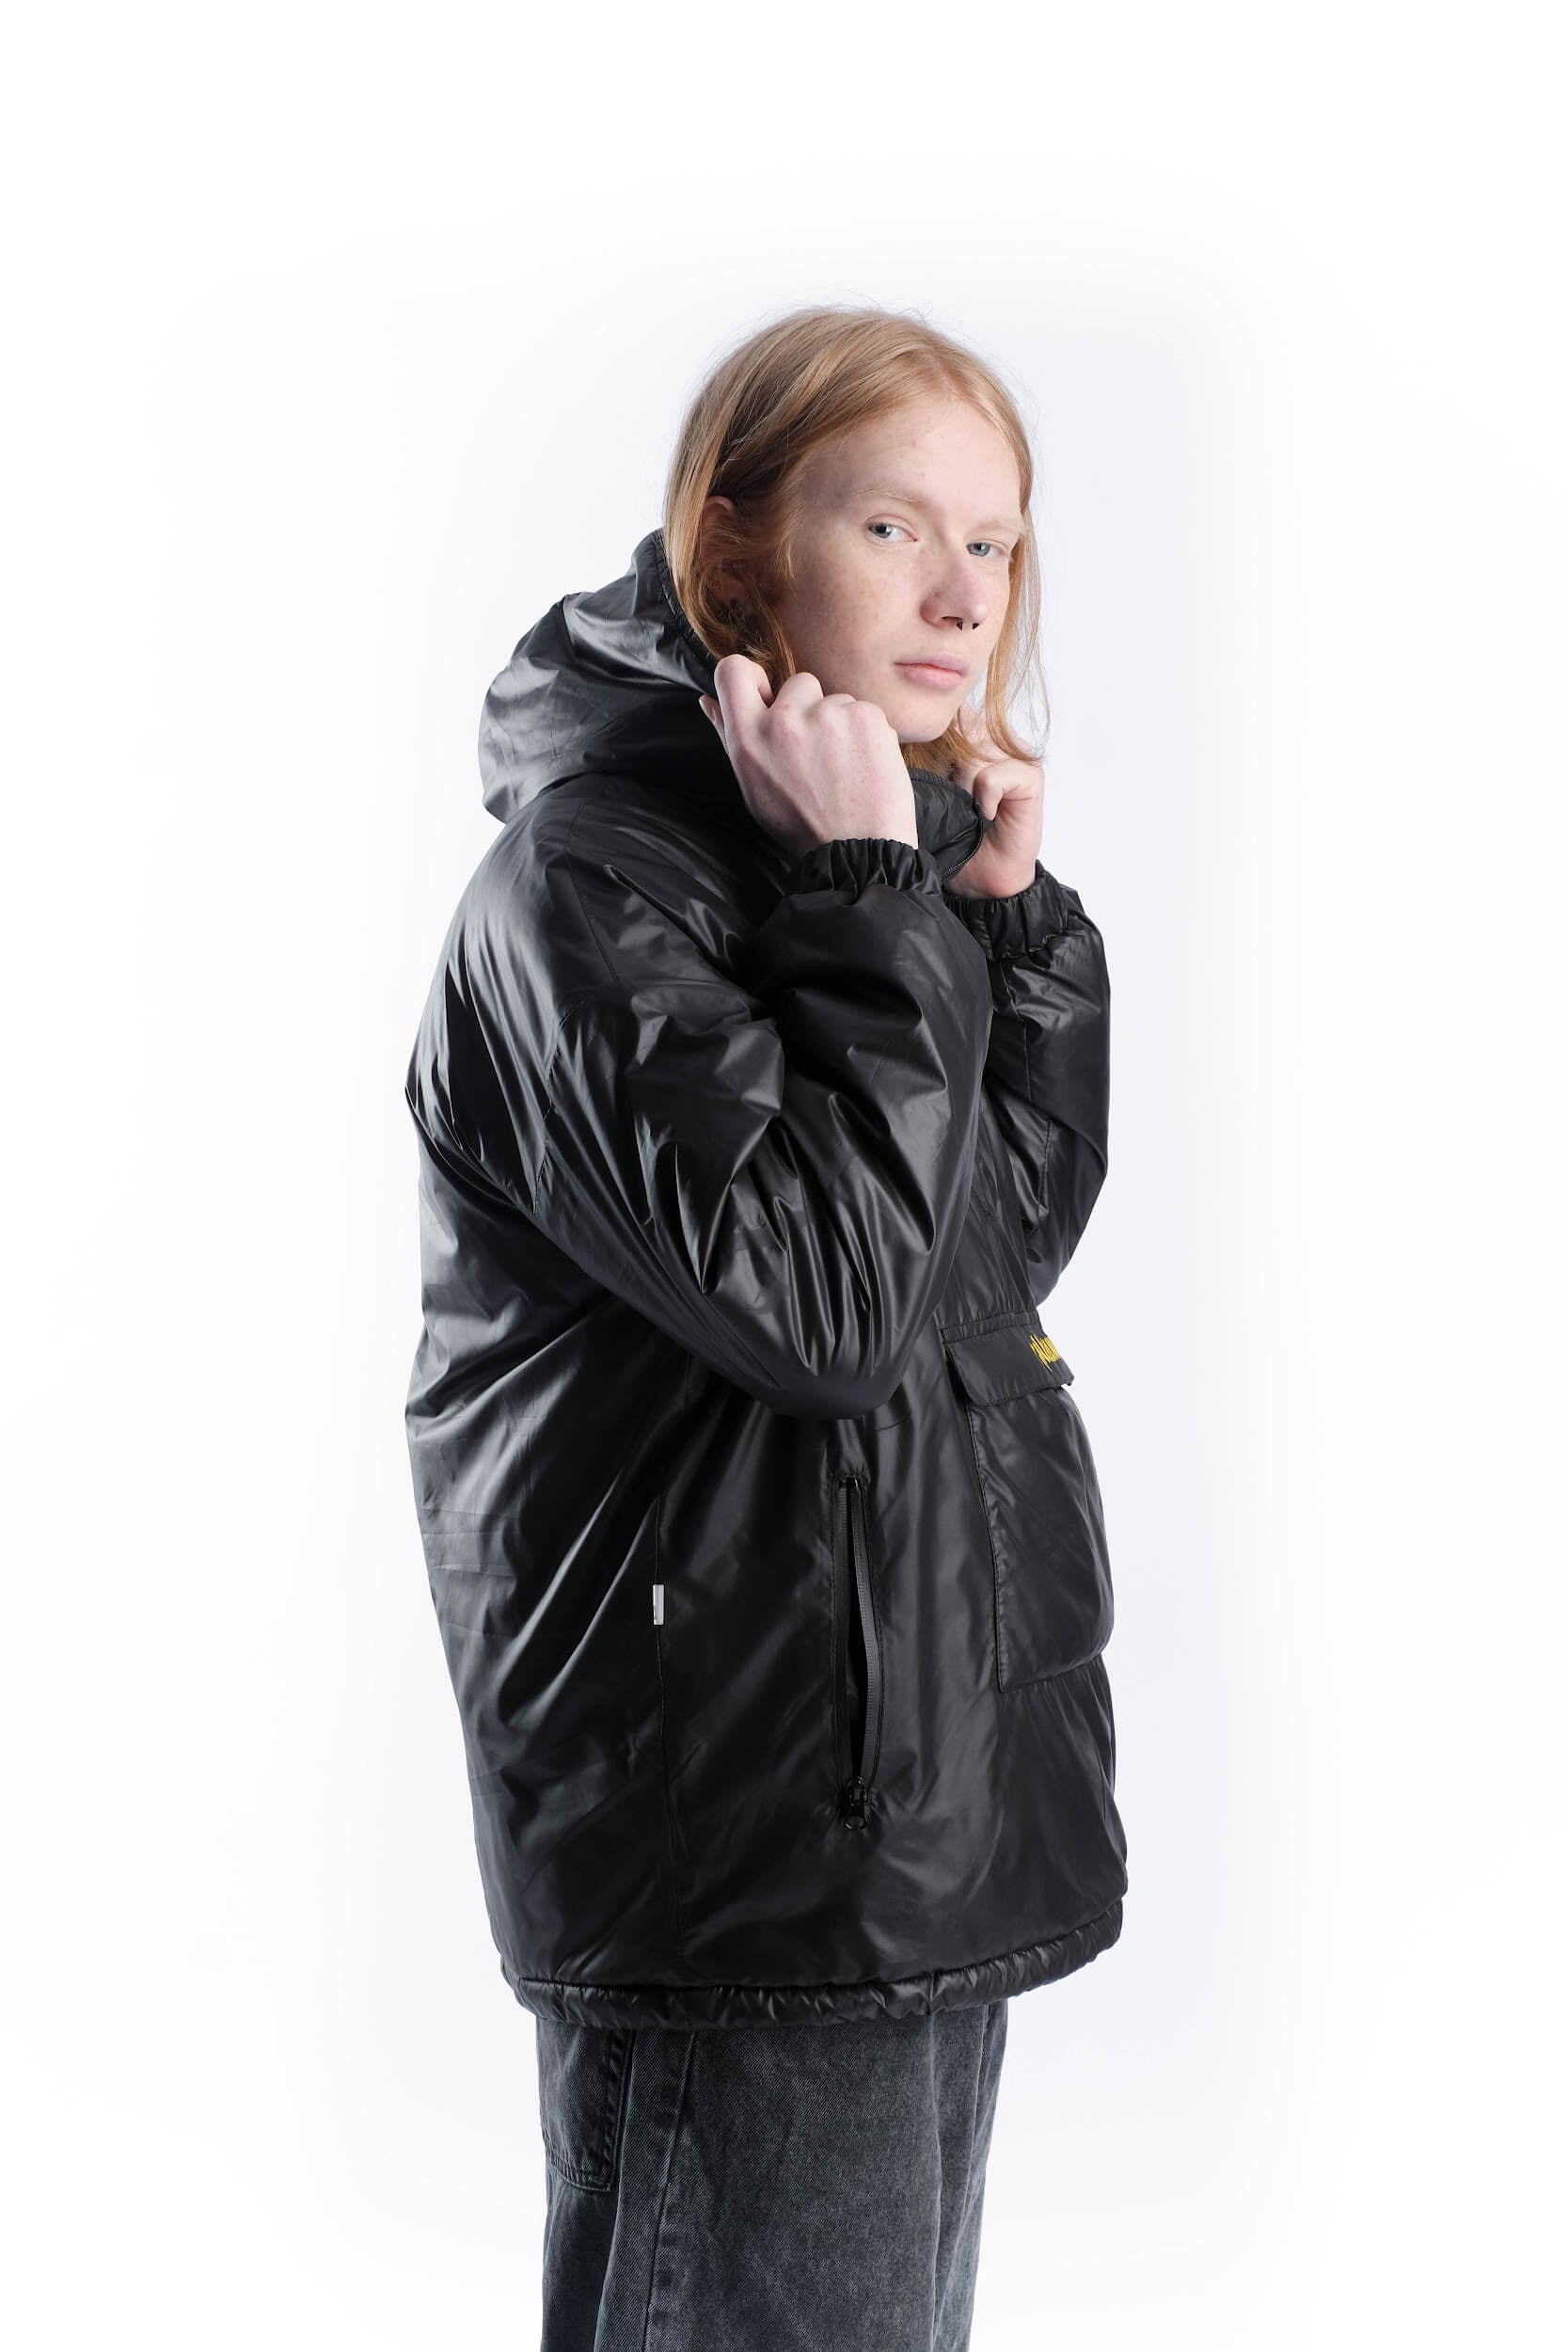 <p>This is a must-have garment for windy or rainy weather. If you love traveling to windy countries, then you can't do without this anorak.</p><p>Composition:</p><p>Outer material: 100% polyester</p><p>Lining: 45% cotton, 55% polyester</p>